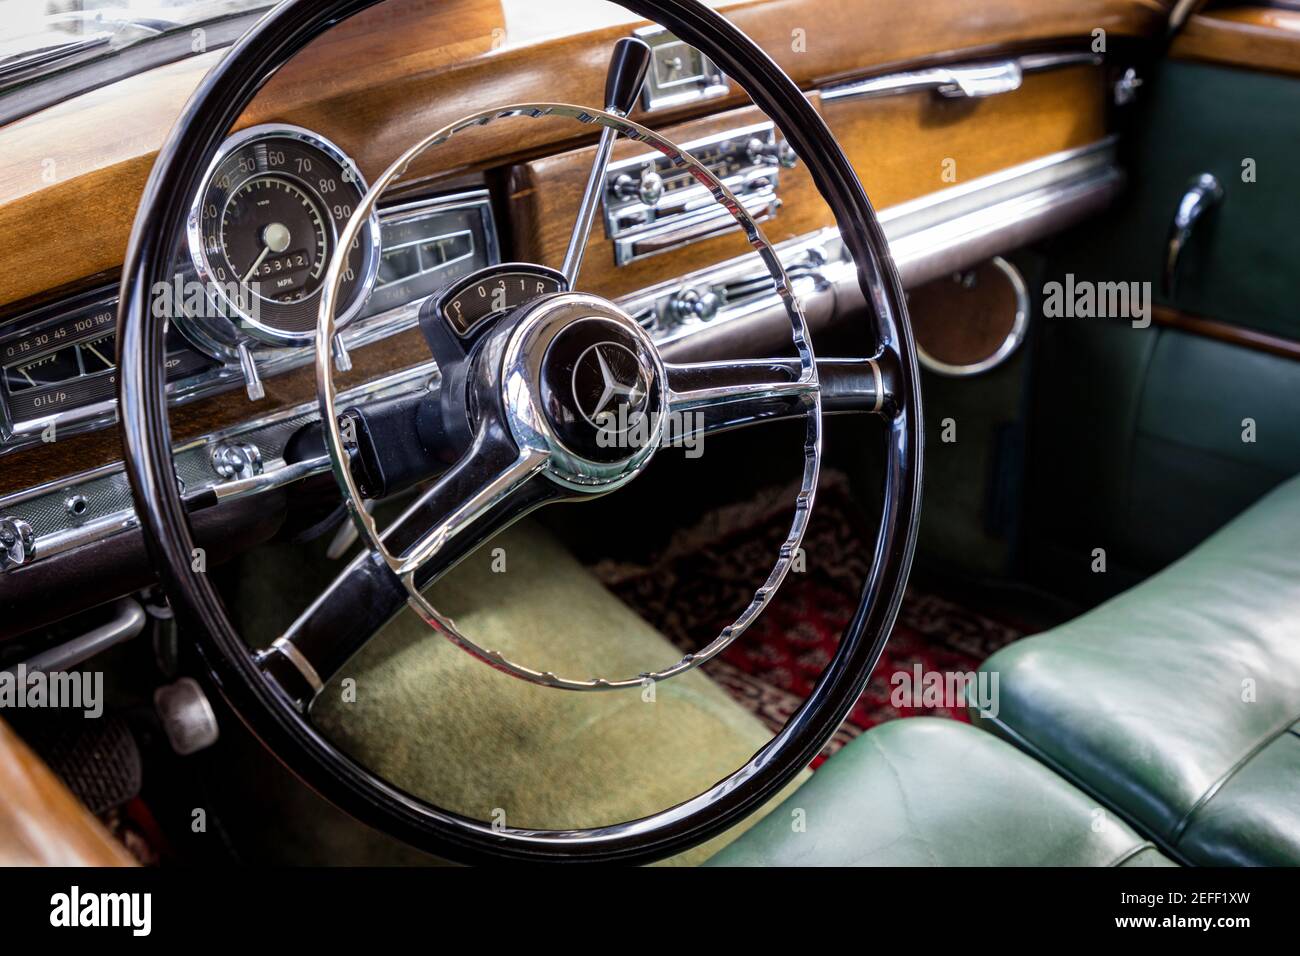 1956 Mercedes Benz '300 Adenauer' on display at 'Cars on Fifth' - Naples, Florida, USA Stock Photo